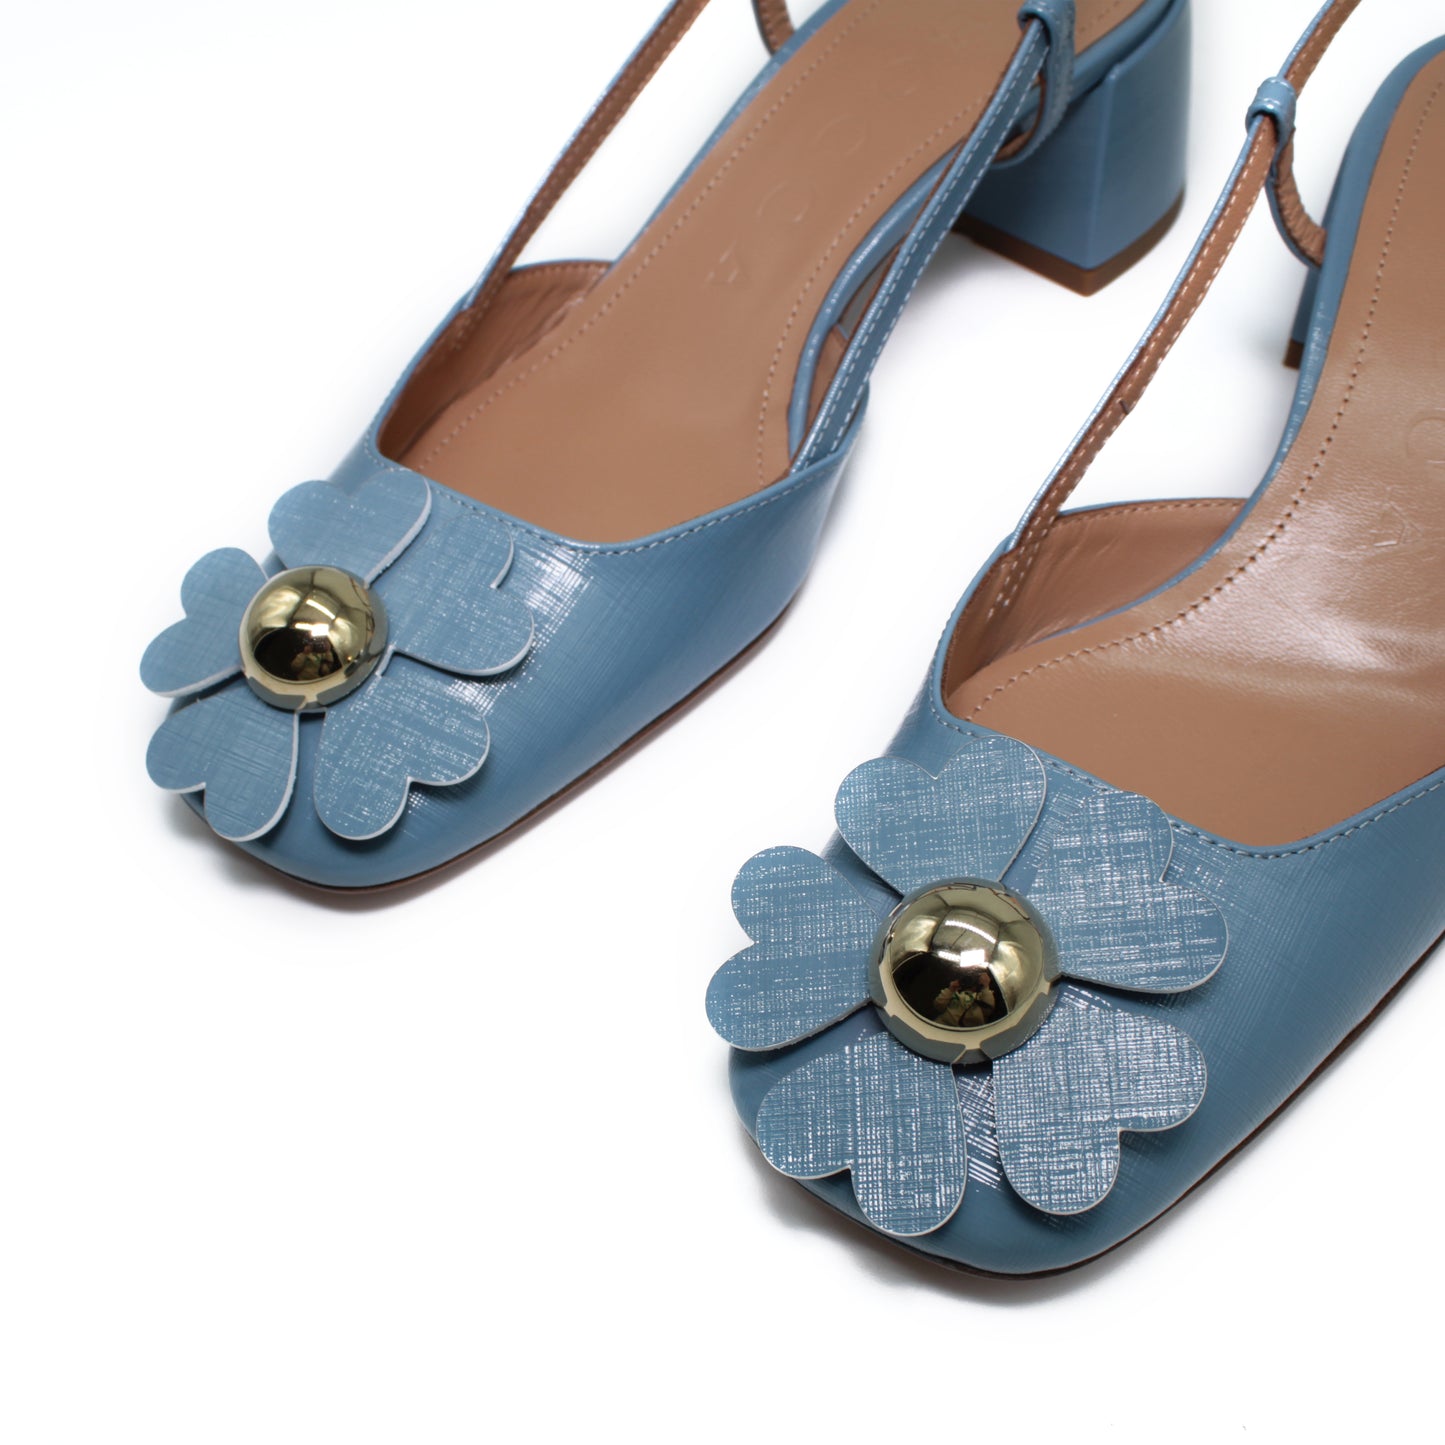 Sling back with maxi-flower in sky blue saffiano